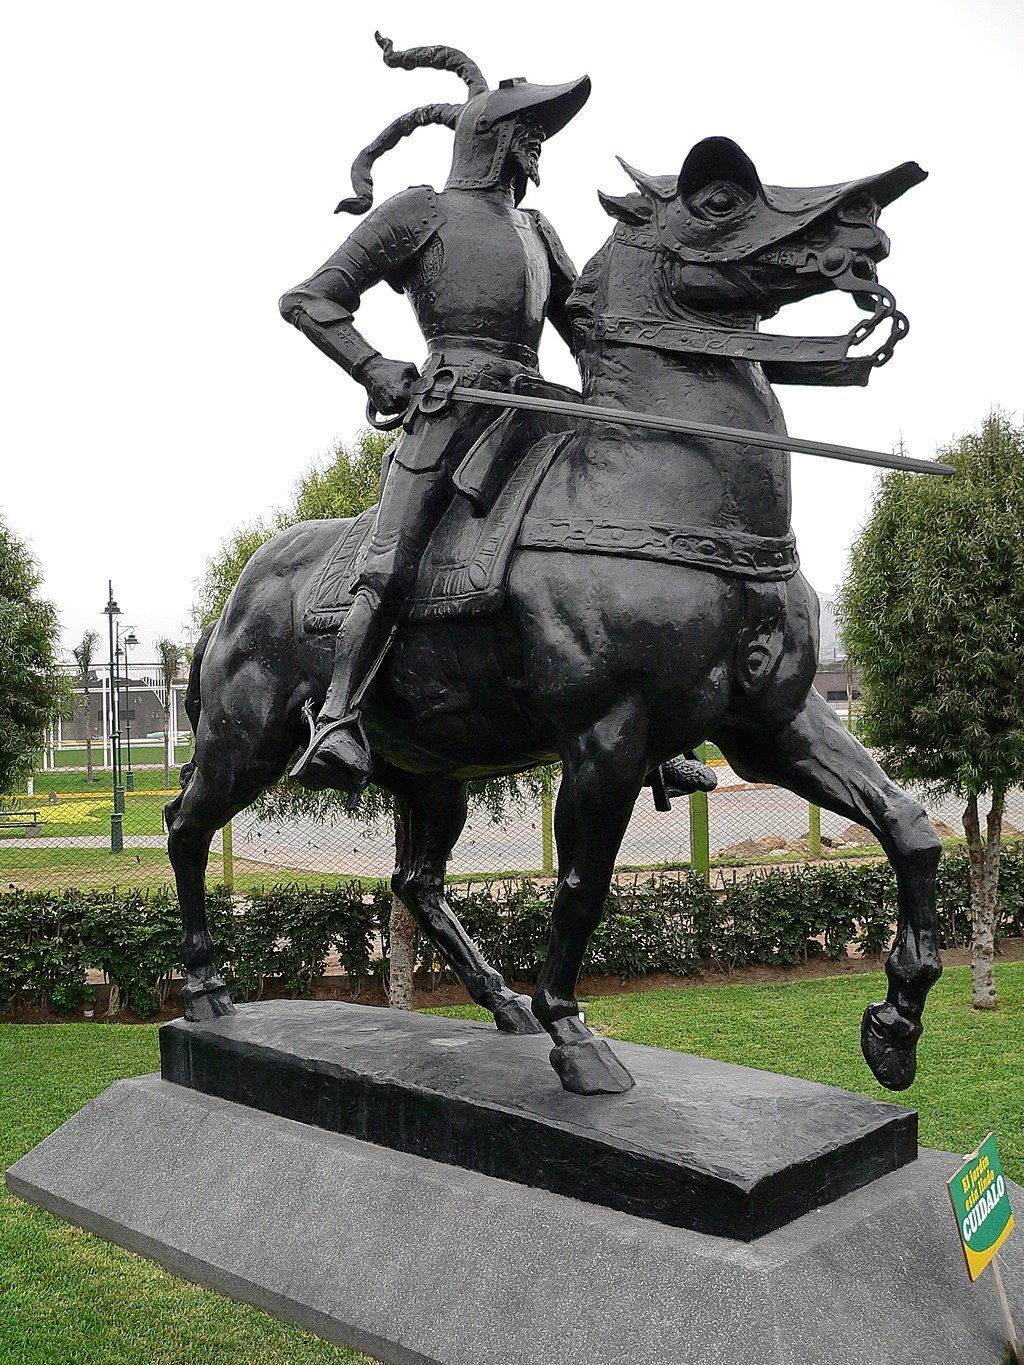 Francisco Pizarro statue in Lima, Peru. Pizarro led the Spanish expedition to Peru, which included Greek conquistadors.